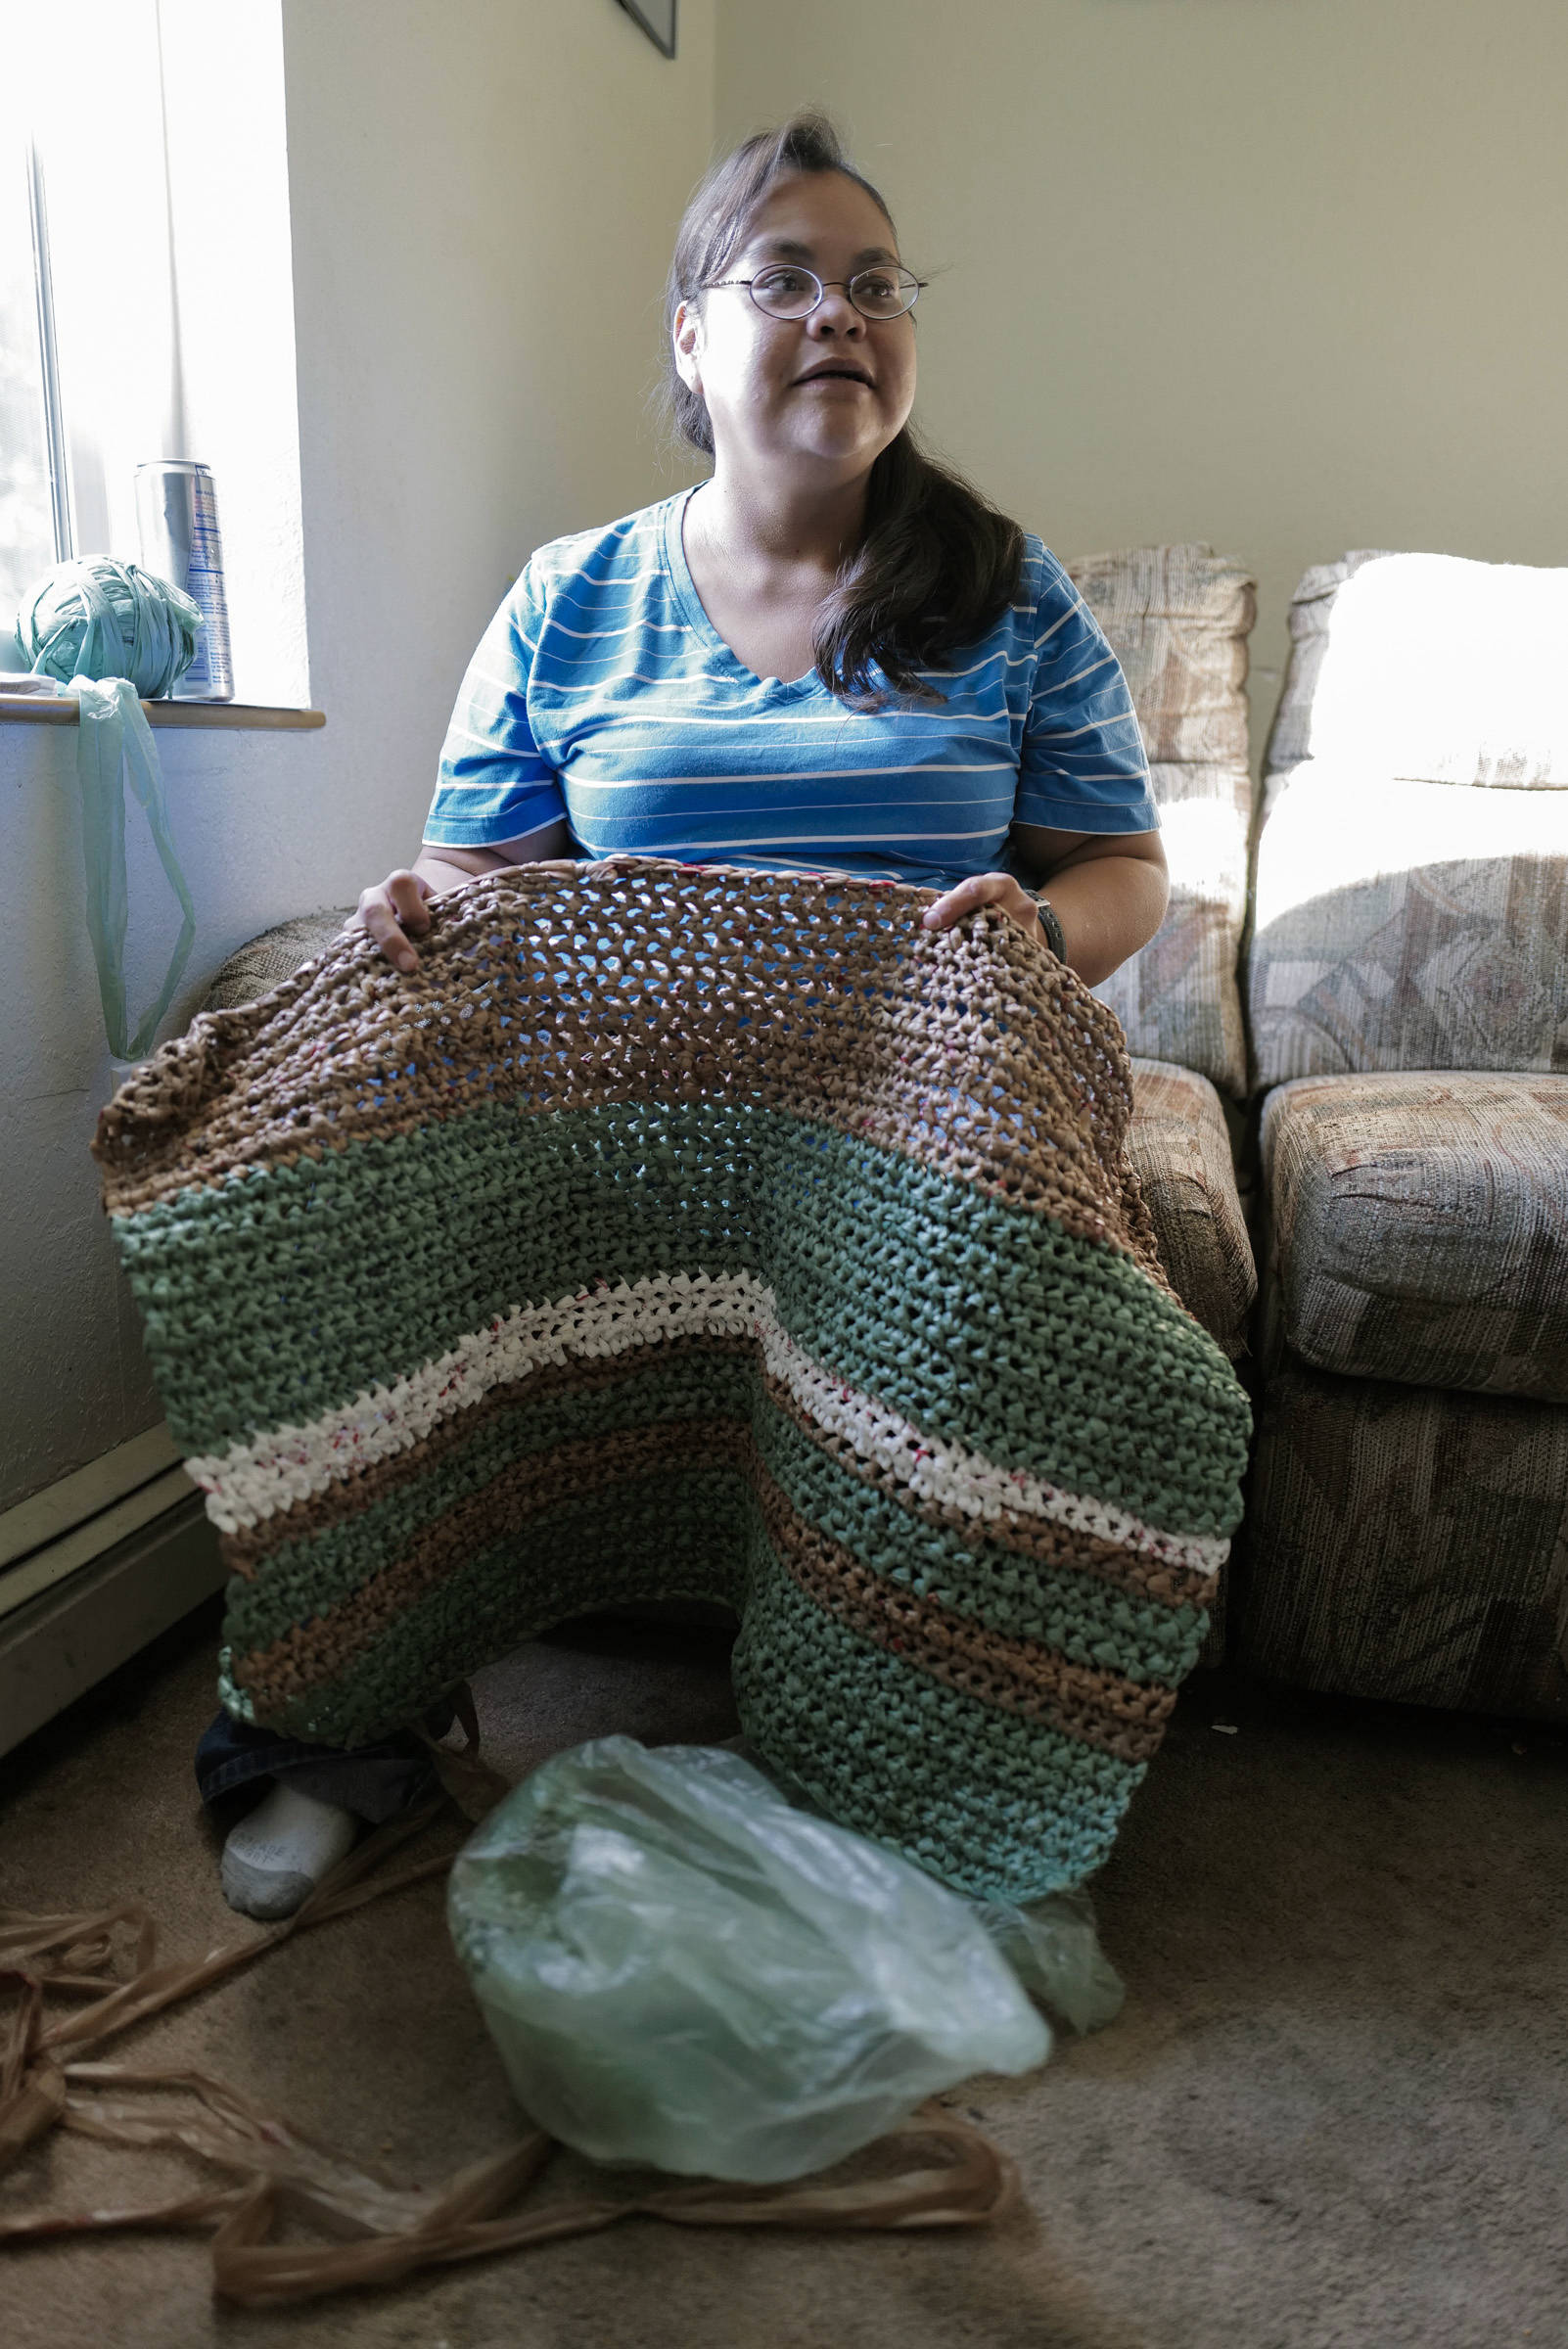 Star White talks about her personal project to make sleeping mats for Juneau’s homeless using plastic grocery bags on Thursday, Aug. 29, 2019. (Michael Penn | Juneau Empire)